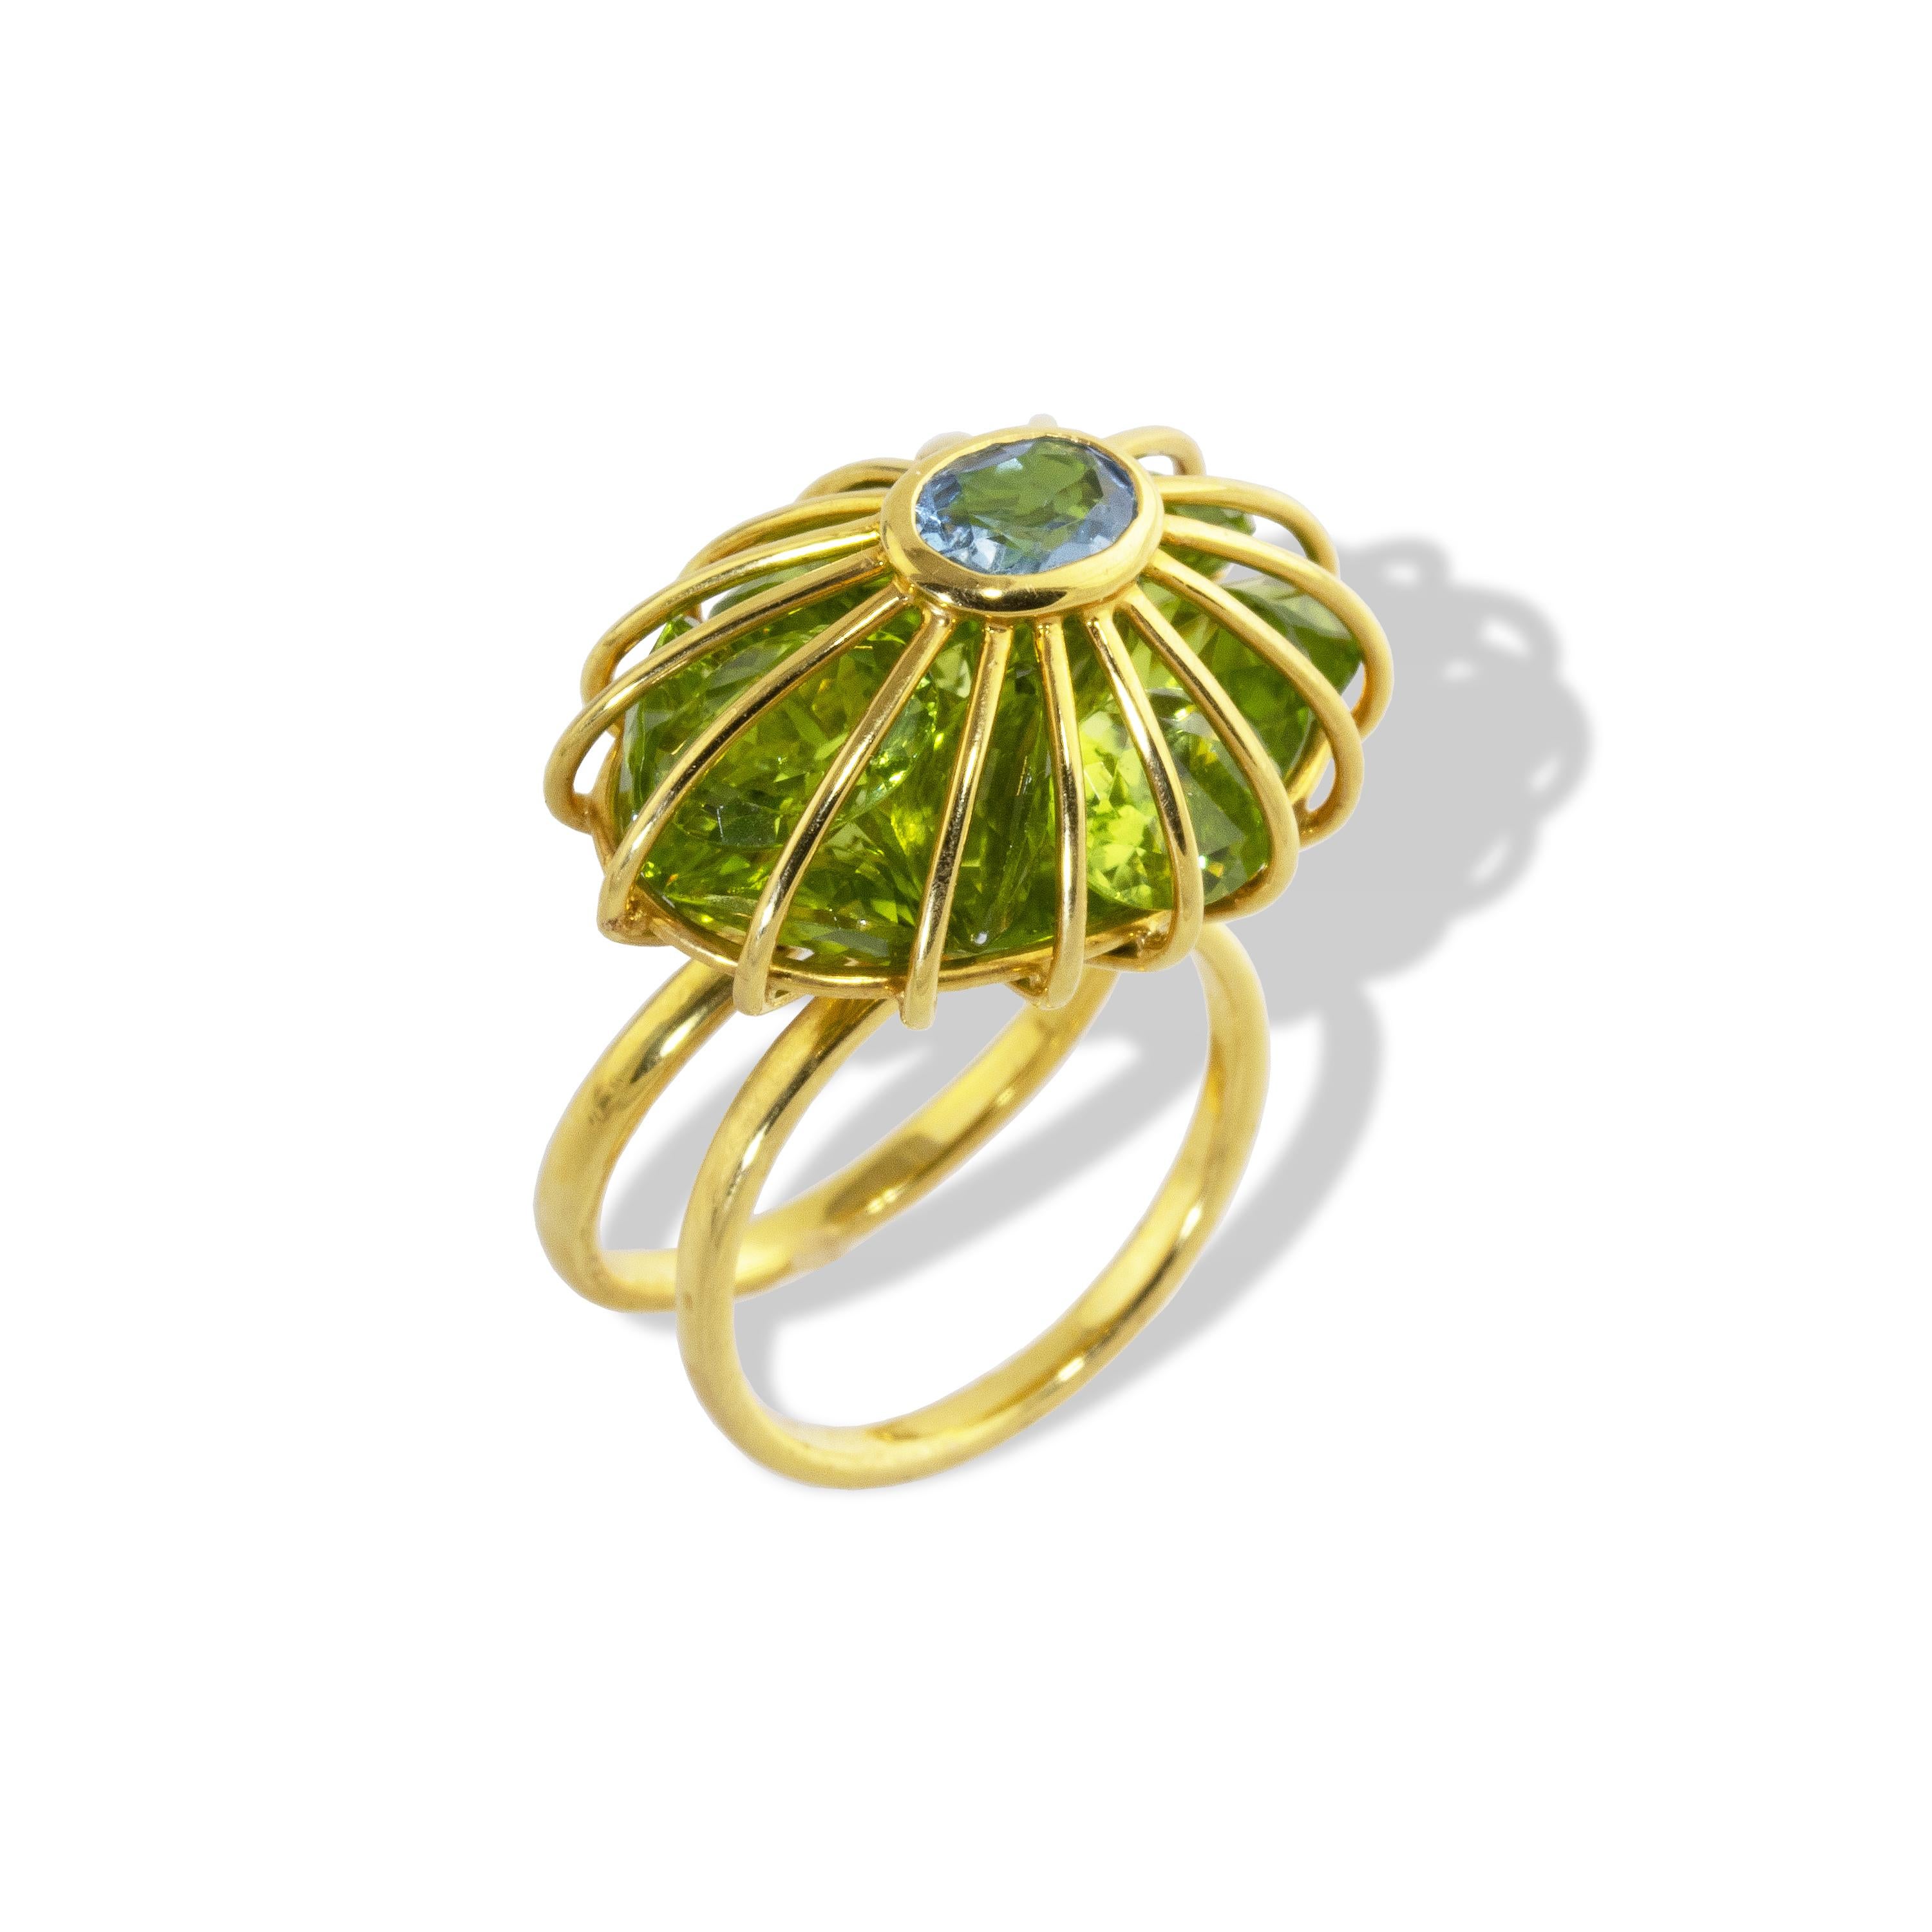 Peridot Cage ring set with loose peridot gemstones and topped with an Aquamarine. 
Filled with 17.73 carats of Peridot and topped with a 2.5carat Santa Maria Aquamarine, known for its deep, rich color.  Stones are loose inside so they catch the